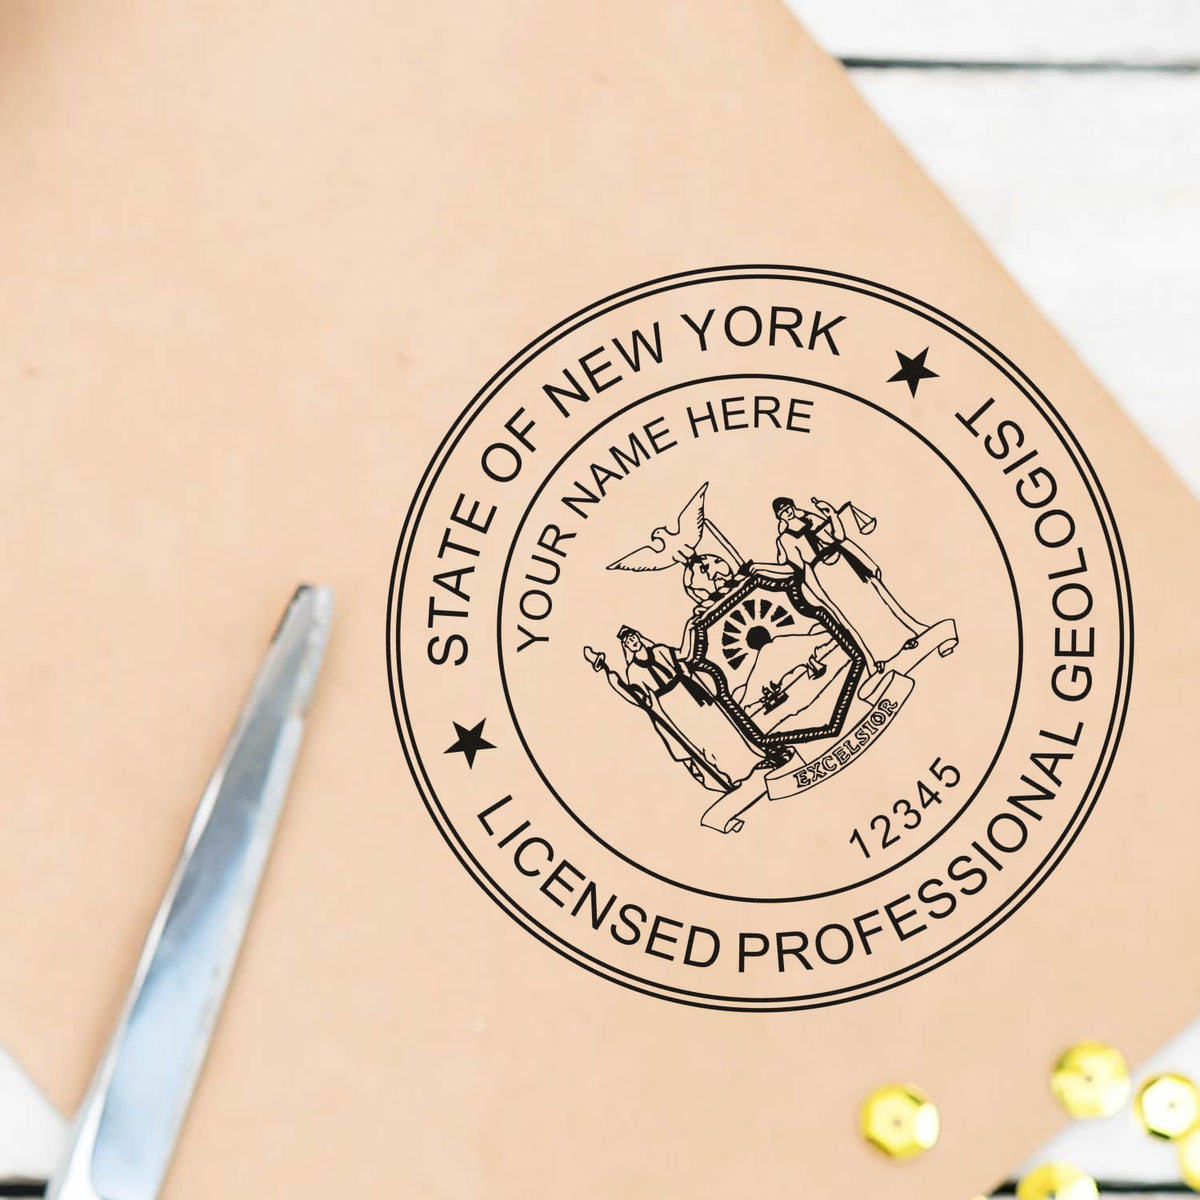 A photograph of the Digital New York Geologist Stamp, Electronic Seal for New York Geologist stamp impression reveals a vivid, professional image of the on paper.